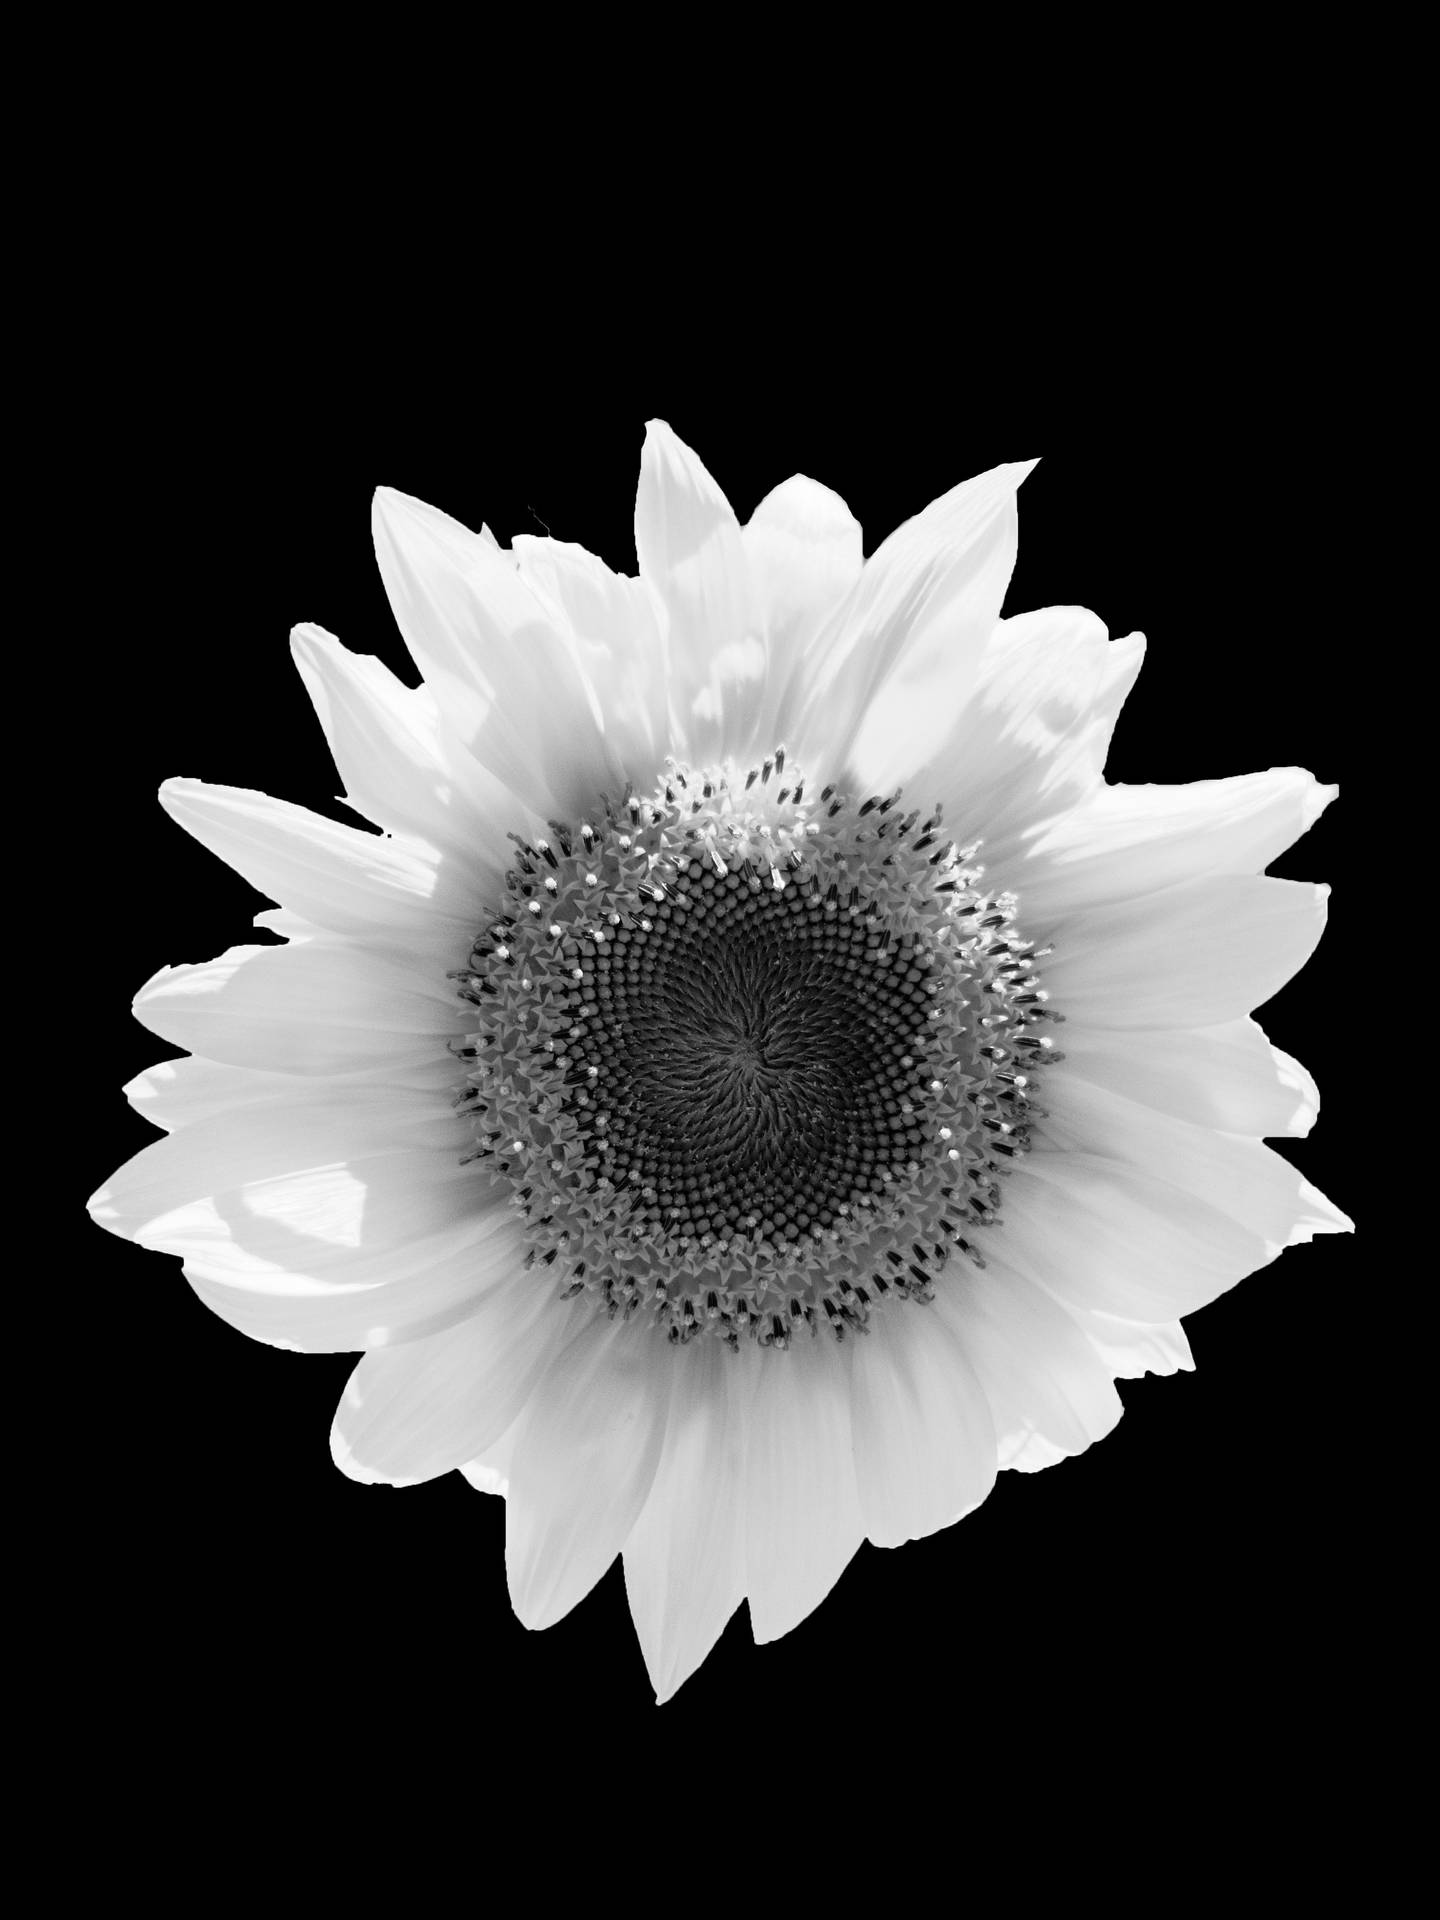 Black And White Flower Android